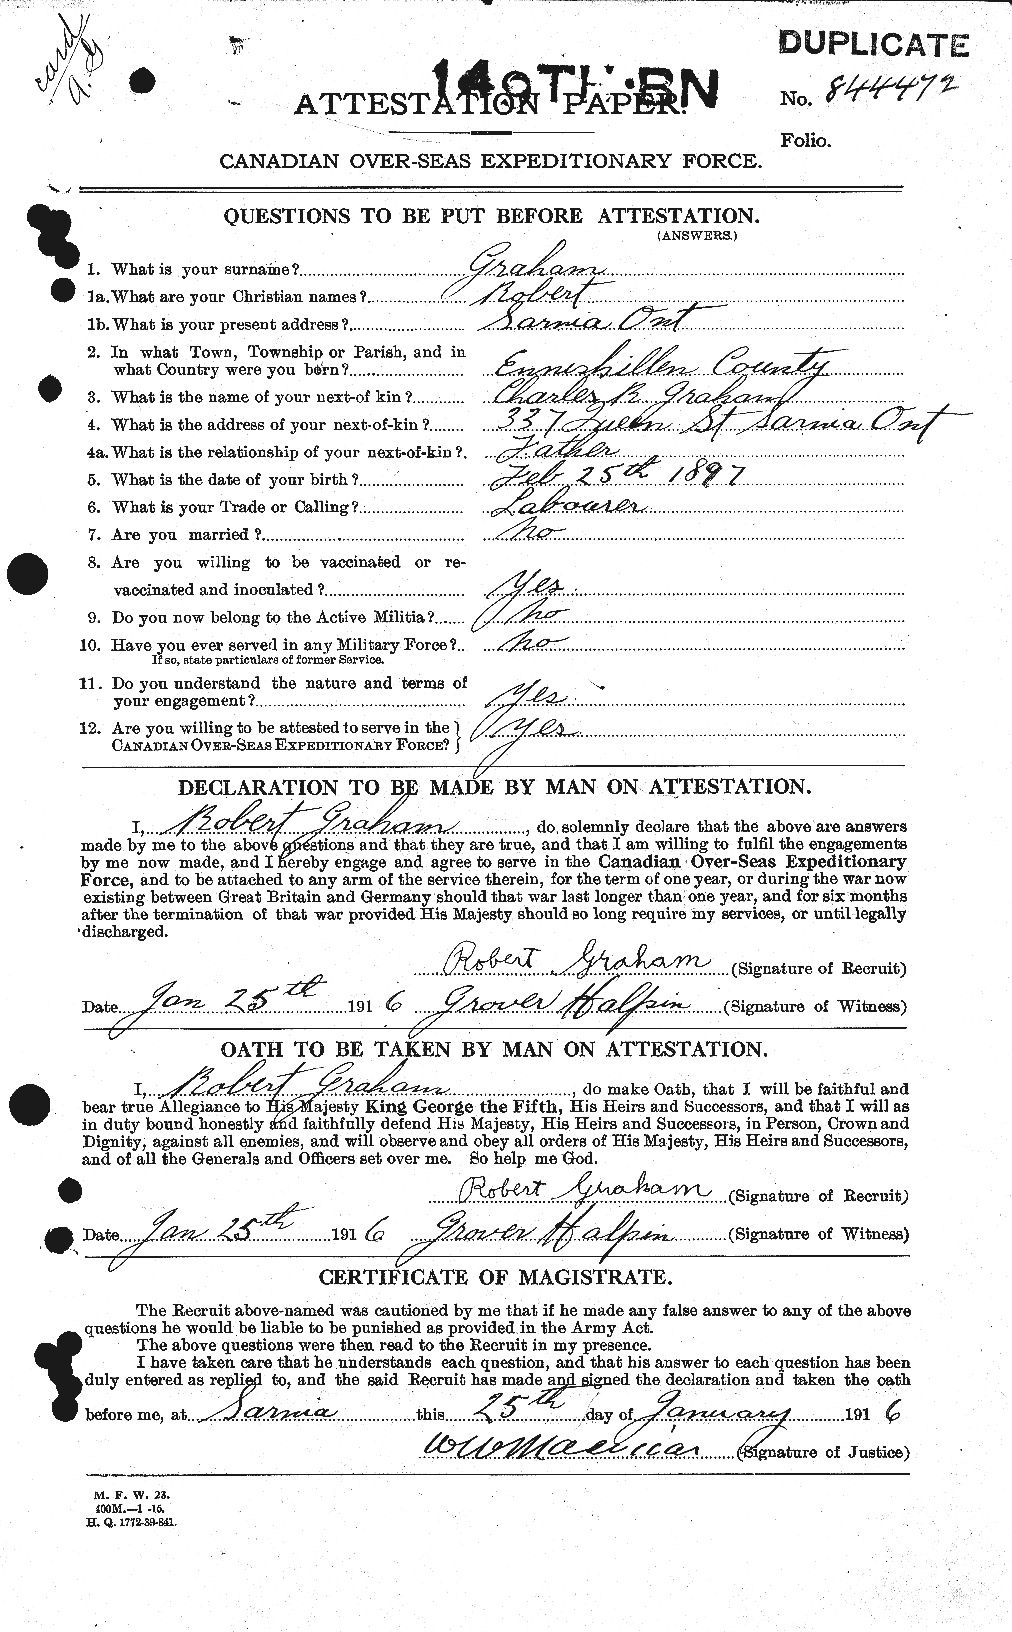 Personnel Records of the First World War - CEF 359386a